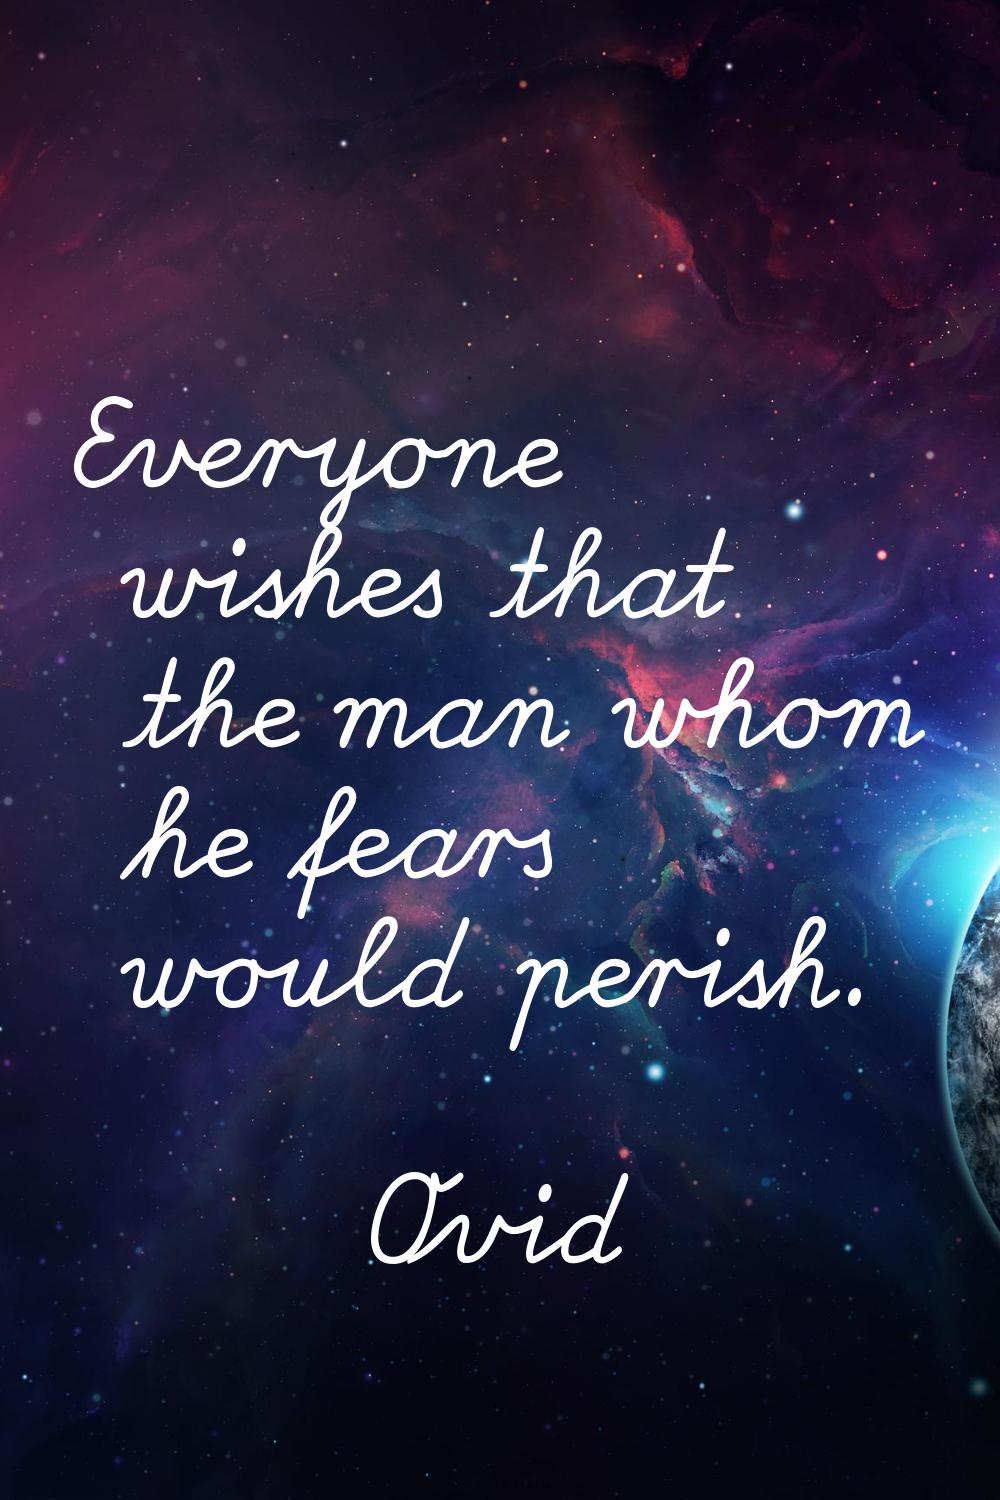 Everyone wishes that the man whom he fears would perish.